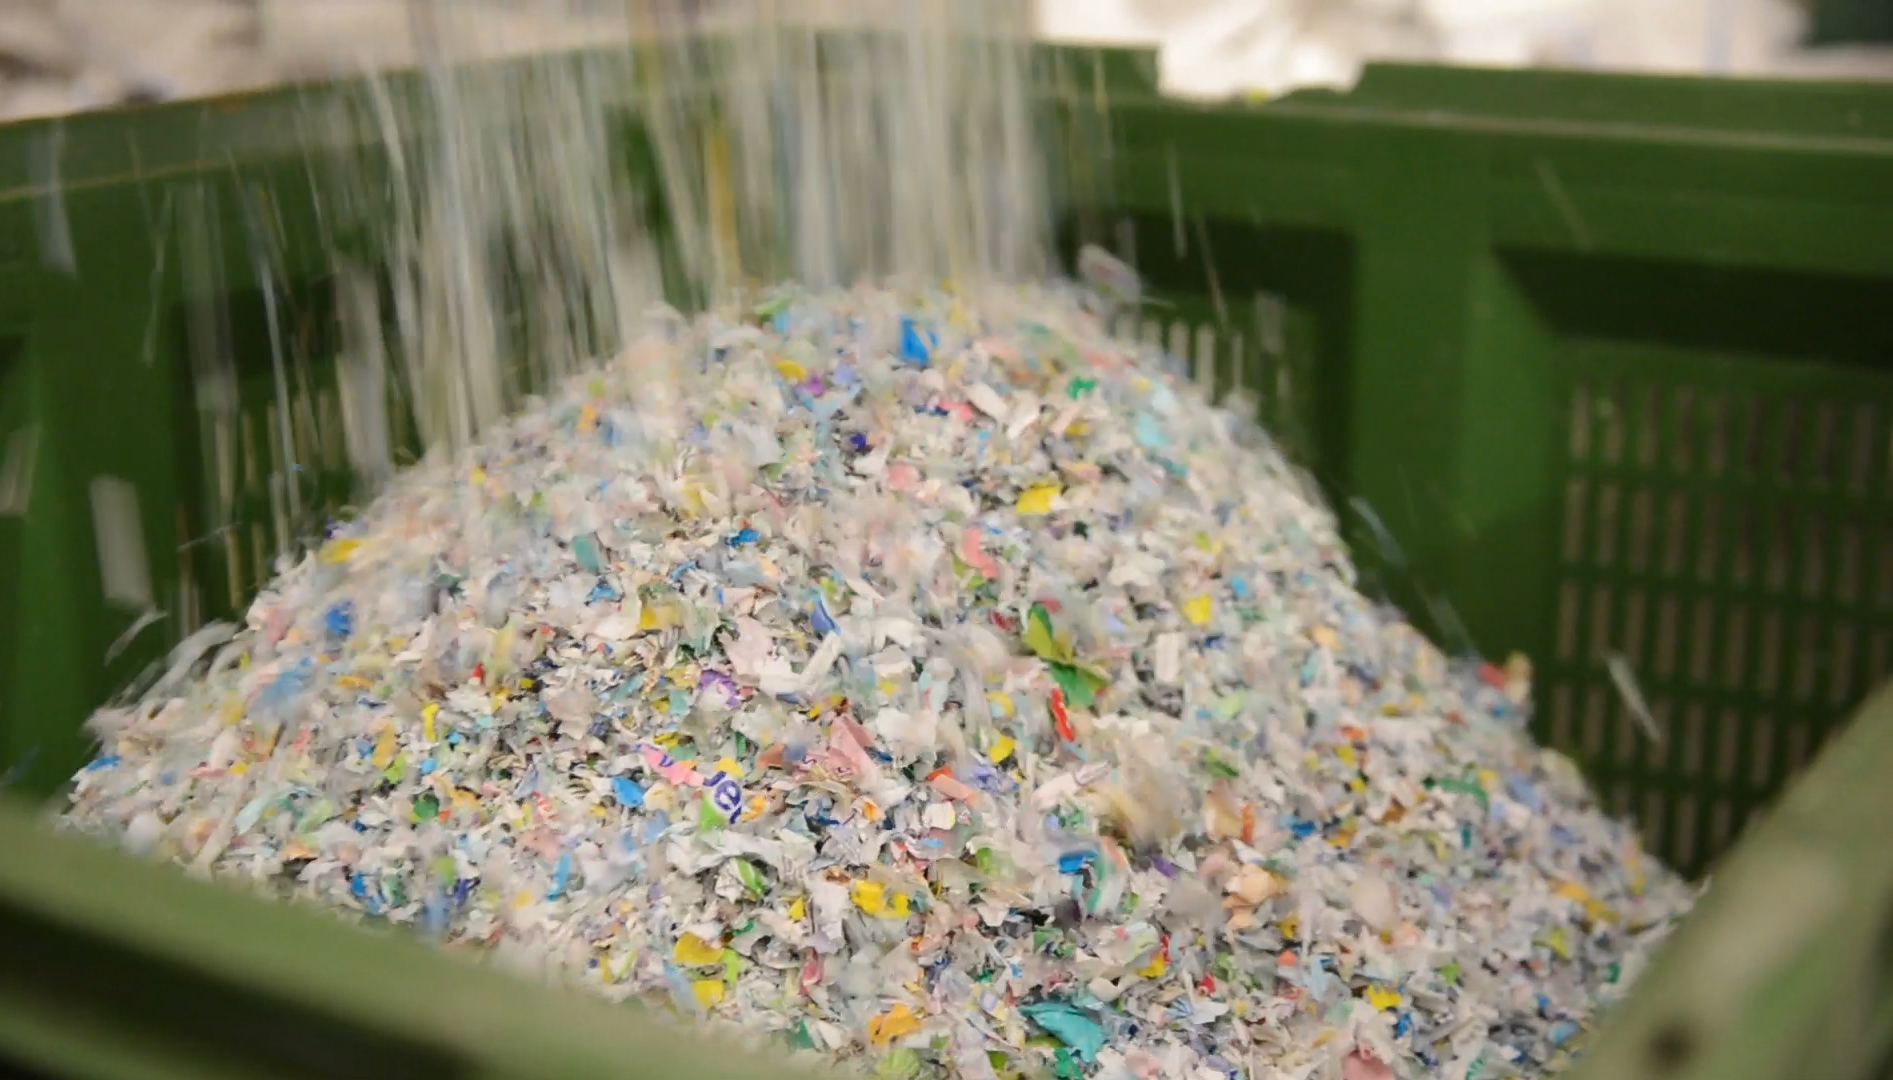 Material collected by TerraCycle is shredded for processing.